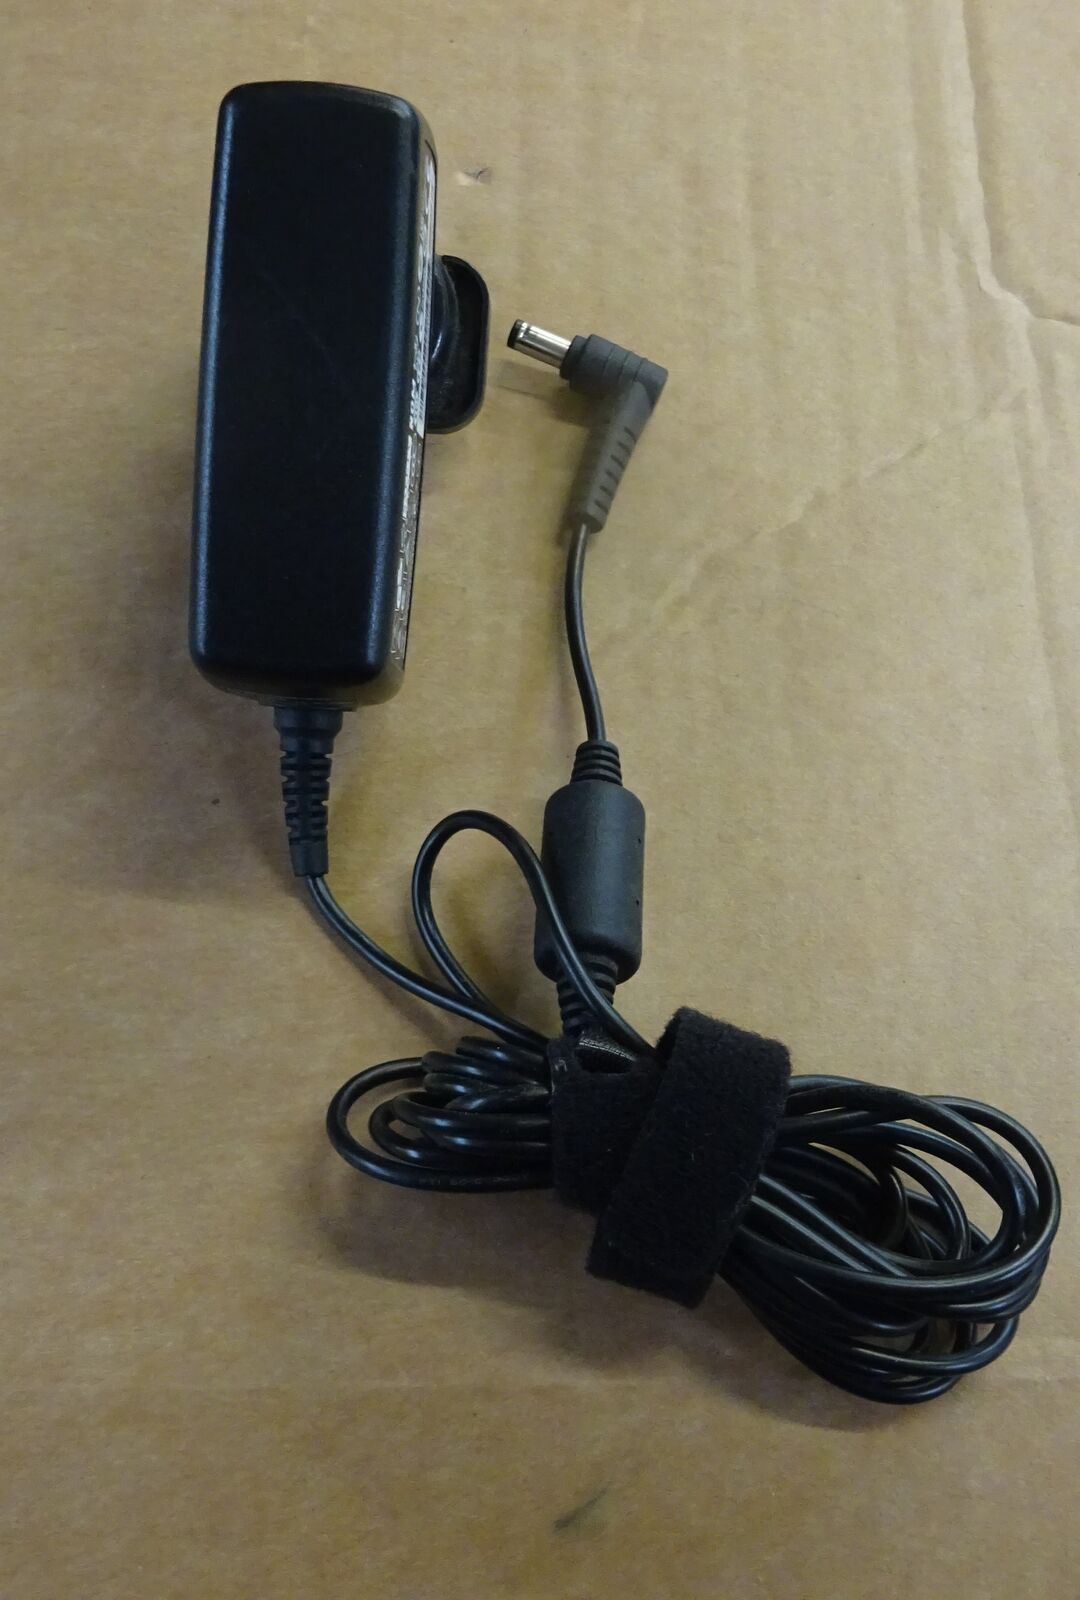 New LEI IU40-11190-011S 19V 2.15A AC DC Power Supply Charger